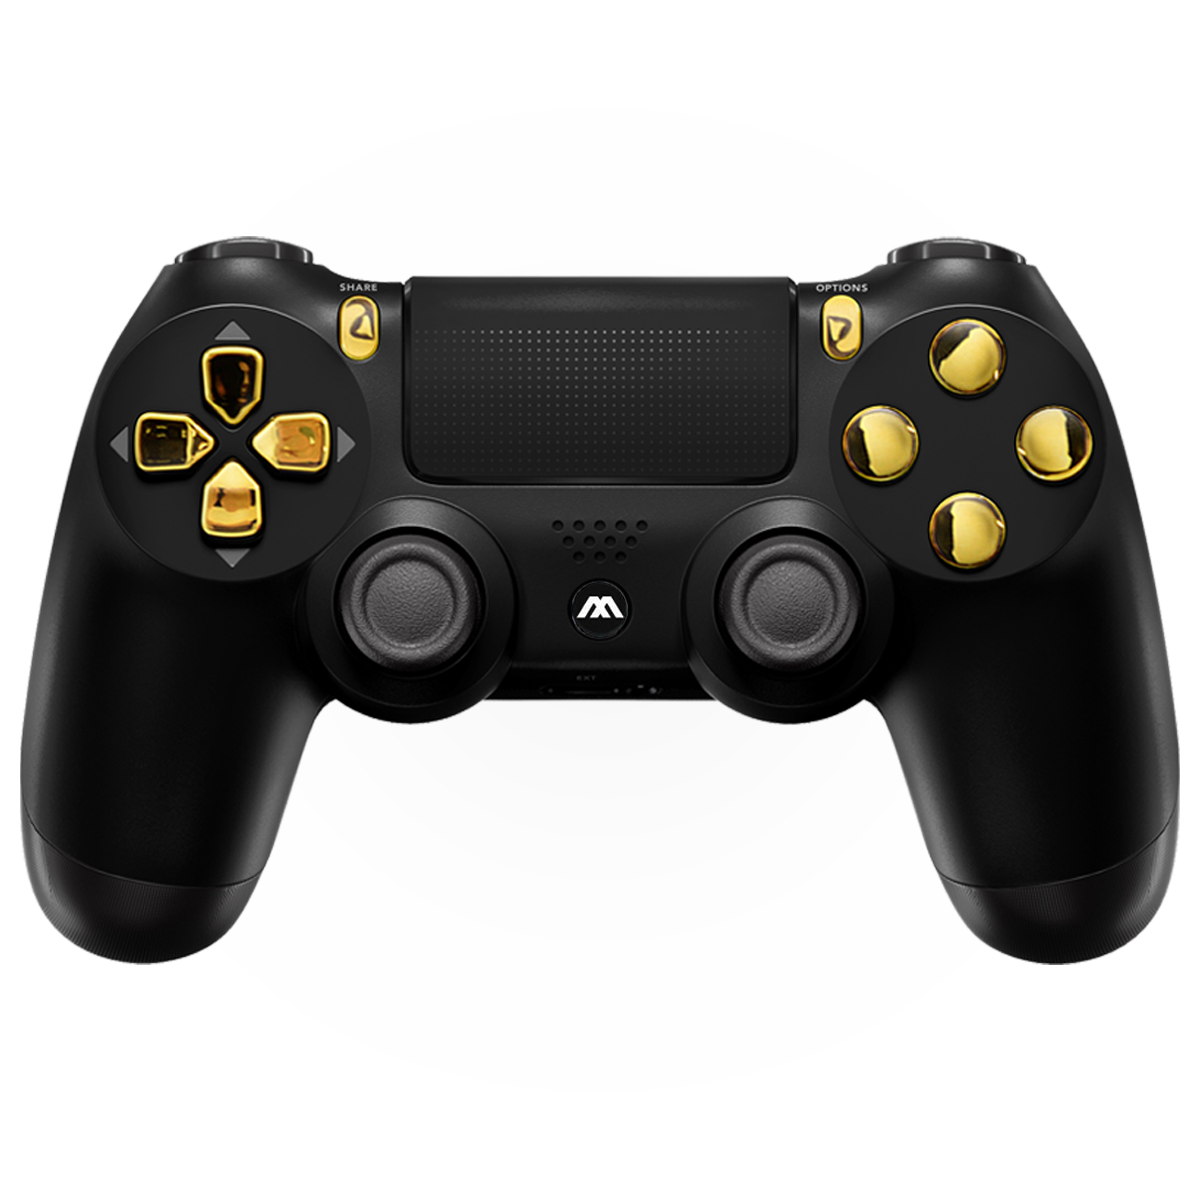 MODDEDZONE Black/Gold Smart Rapid Fire Controller Compatible with PS5  Custom Modded Controller All Shooter Games & More